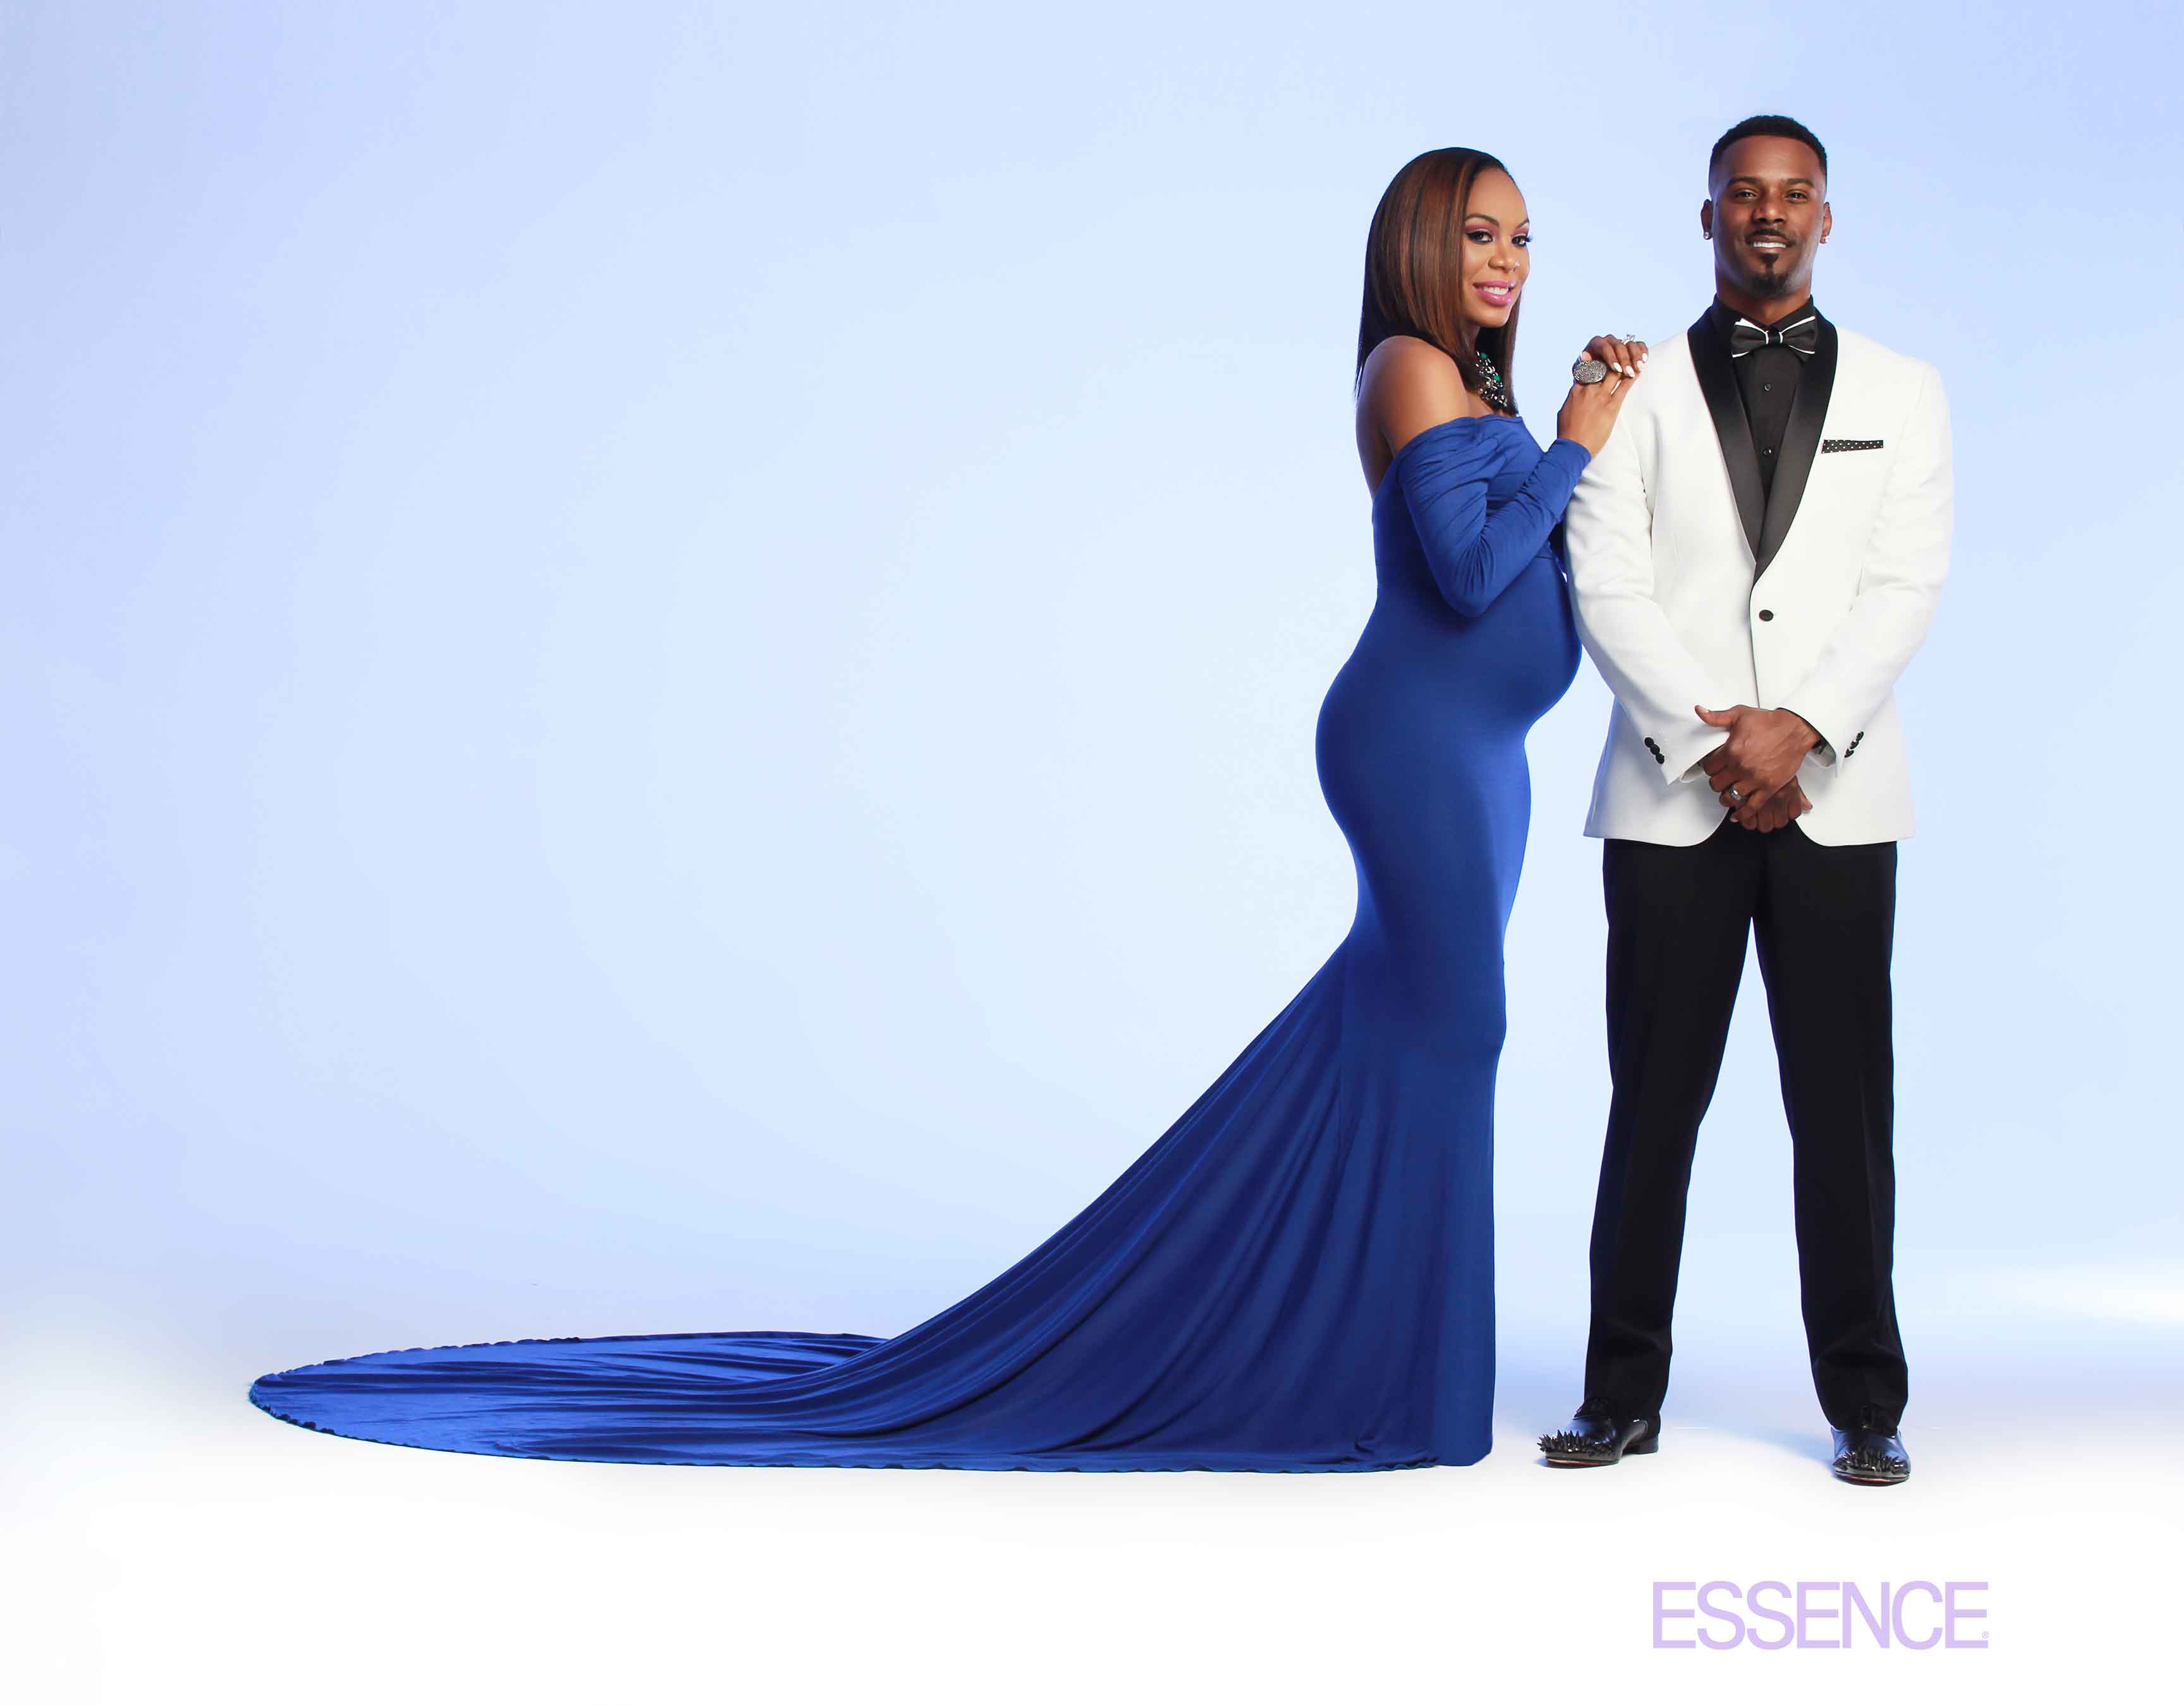 EXCLUSIVE: Sanya Richards-Ross and Husband Share Their Beautiful Maternity Shoot
